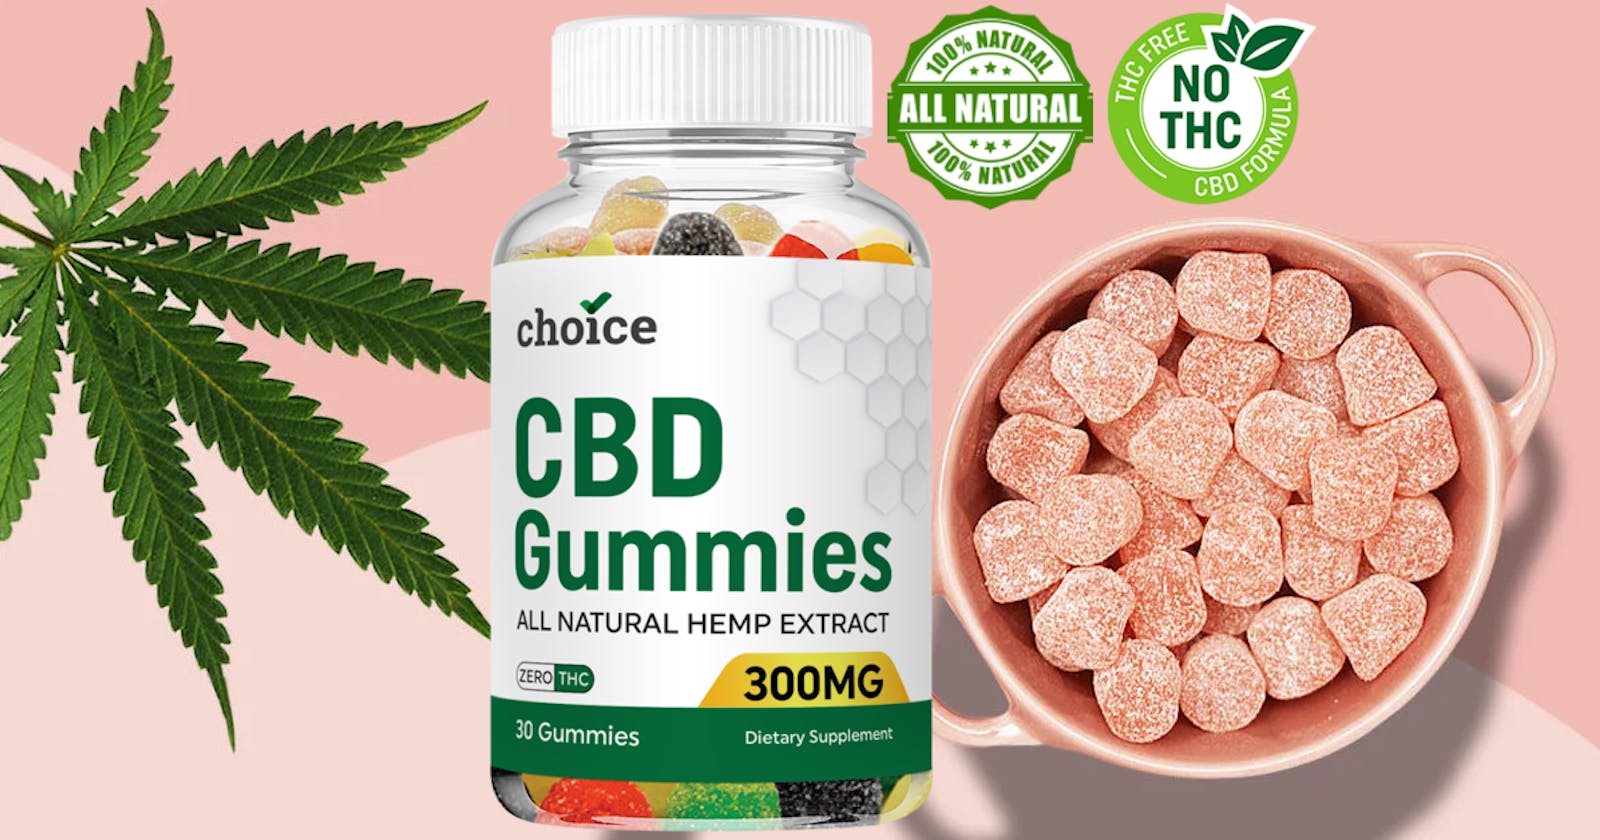 Choice CBD Gummies (Consumer Feedbacks) Safe, Non-Habit Forming, Effective and Relieves Anxiety & Stress [Hoax Alert]